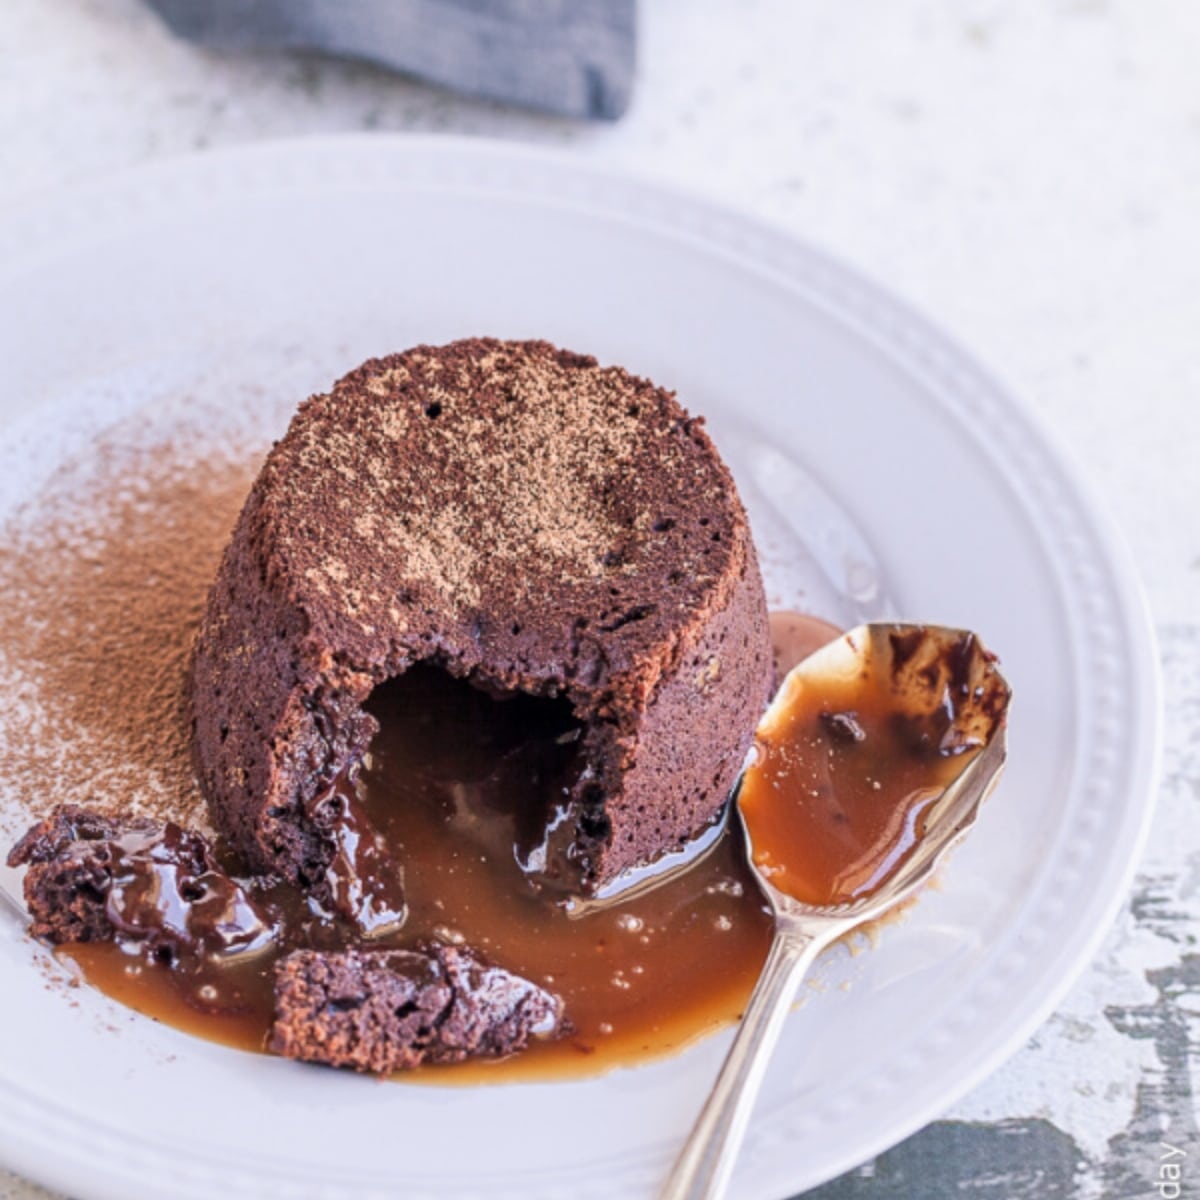 Chocolate Fondant Recipe with Salted Caramel Filling